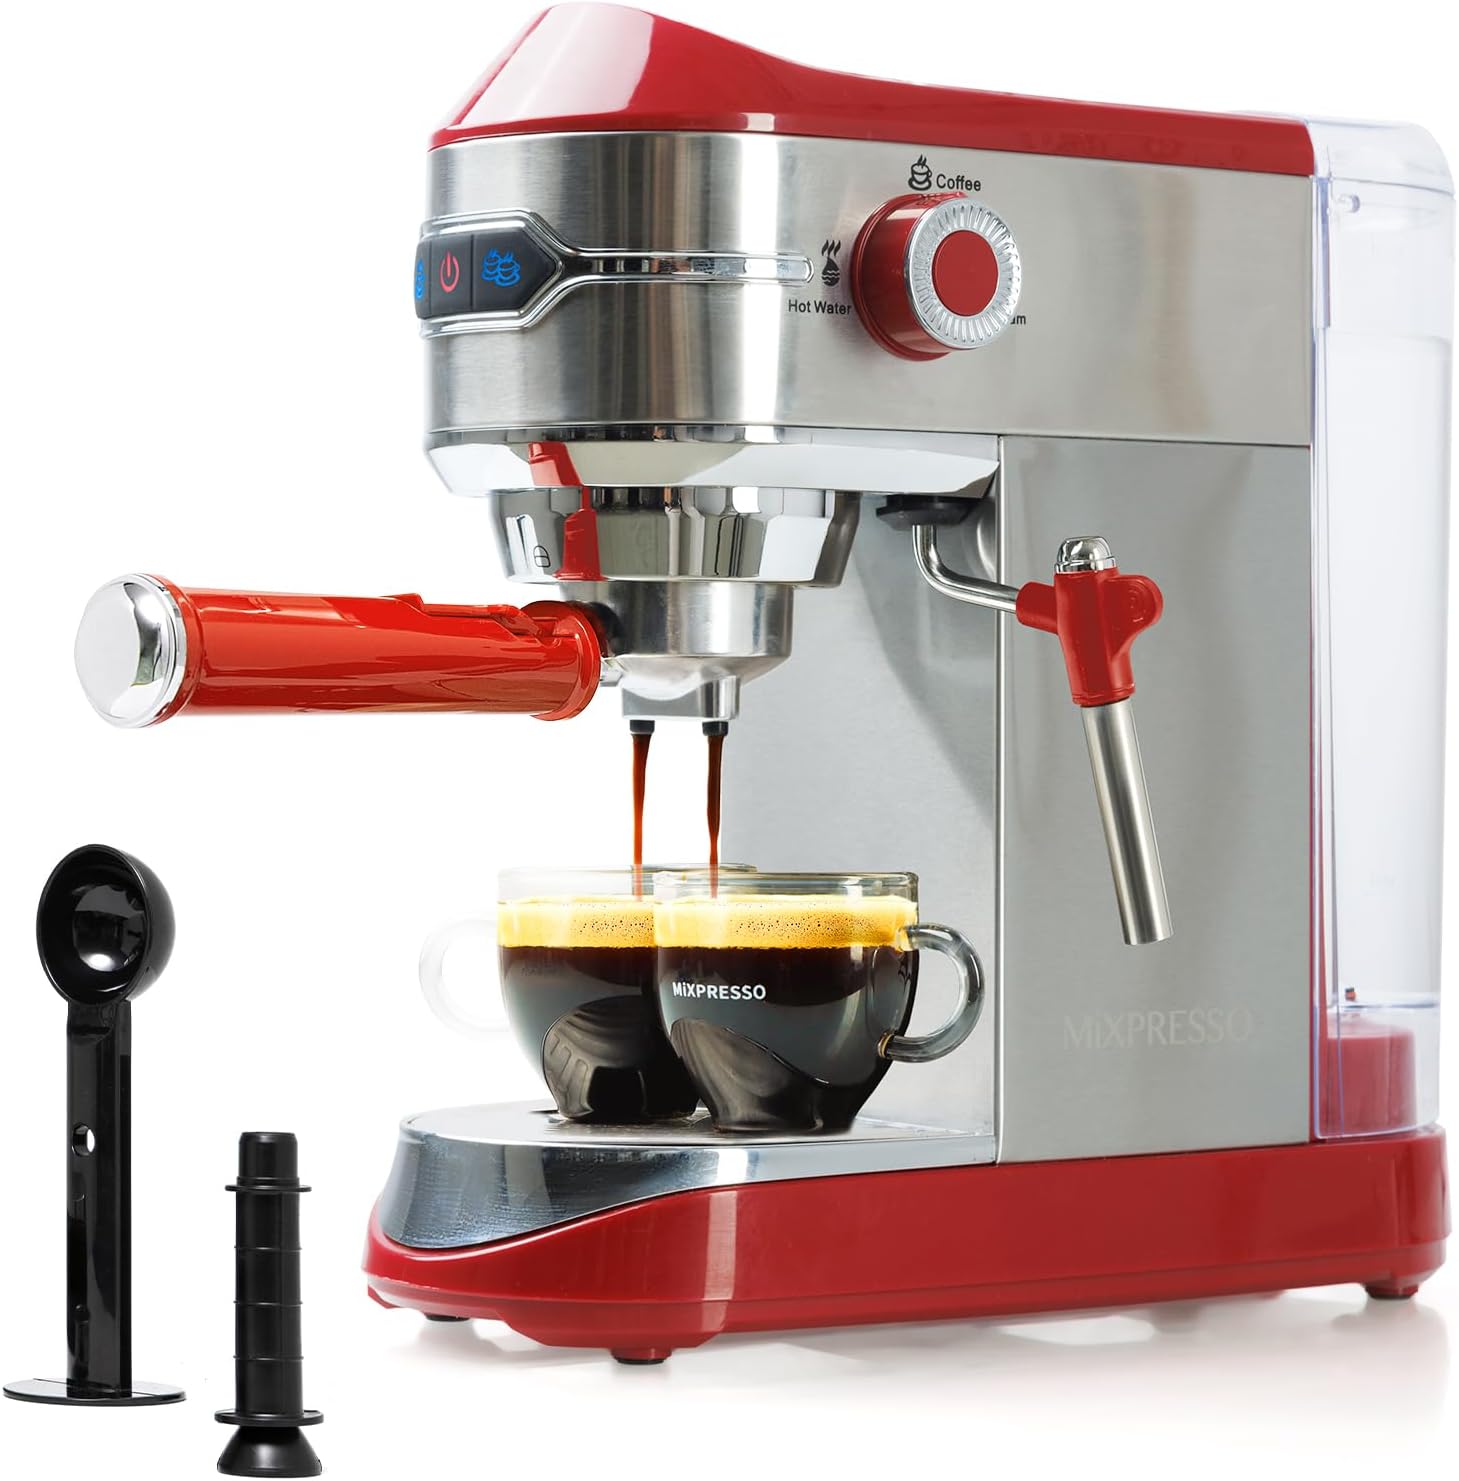 Mixpresso Professional Espresso Machine for Home 15 Bar with Milk Frother Steam Wand, Espresso Maker with Double-Cup Splitter, 1450w Fast Heating, Cappuccino and Latte machine with 37Oz Water Tank